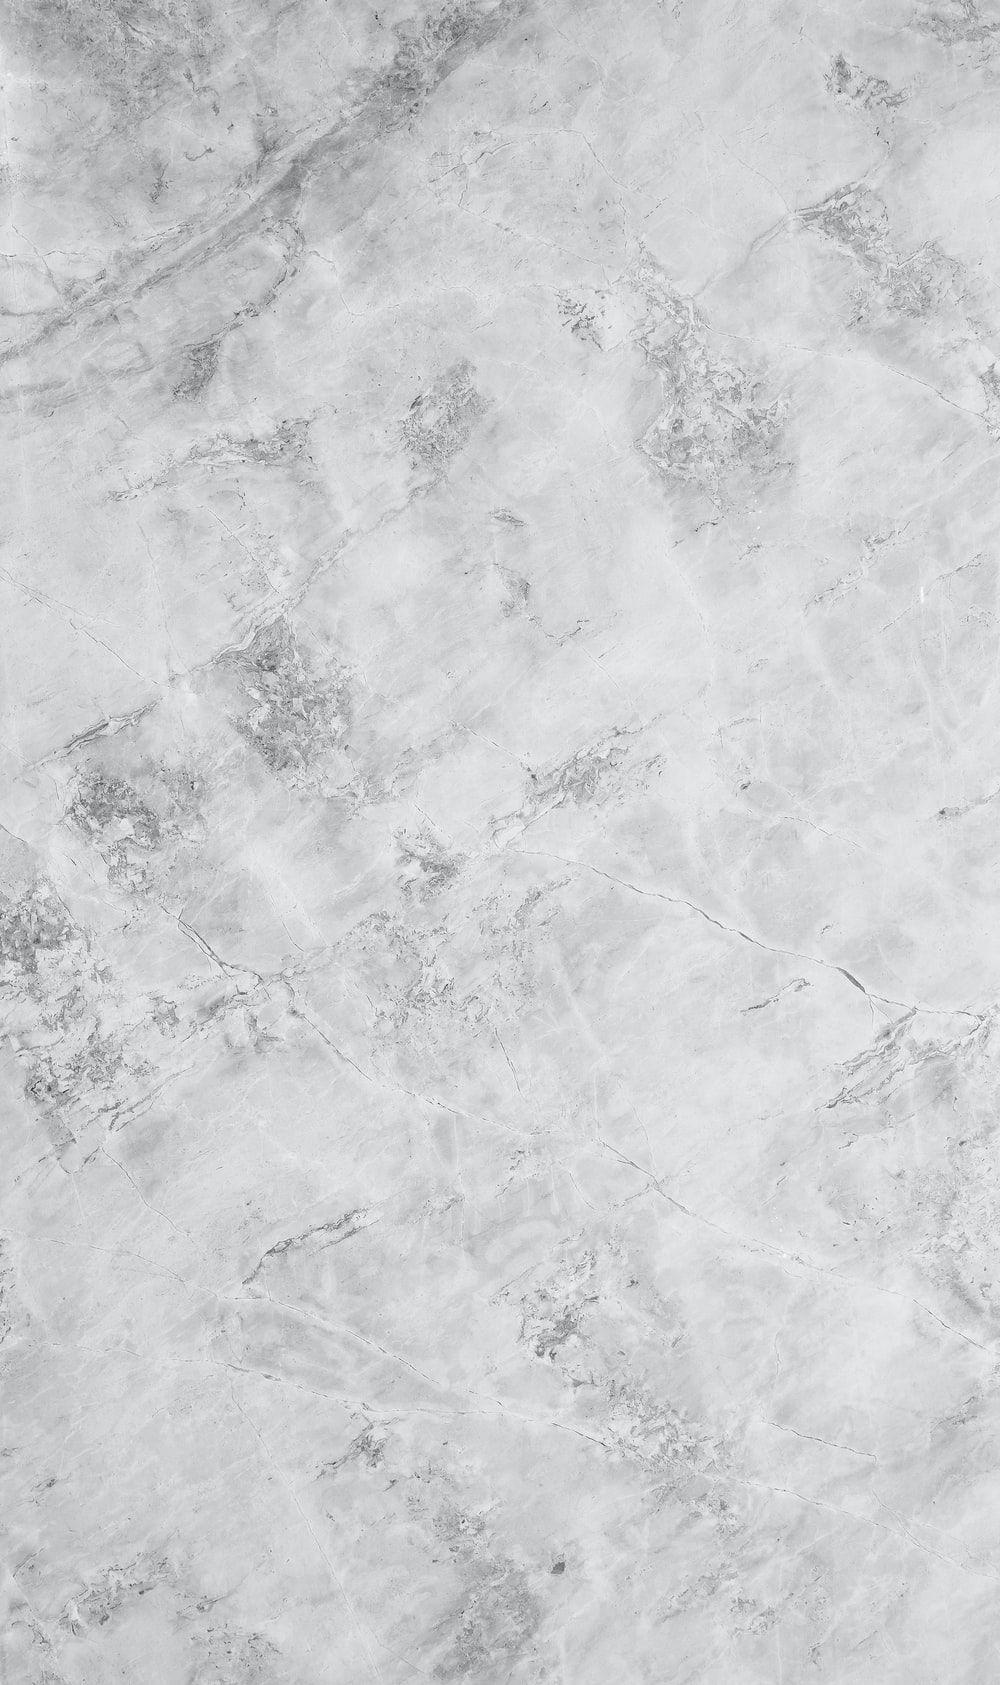 Light Gray Wall Abstract Frosted Grainy Rough Texture Background Wallpaper  Image For Free Download - Pngtree